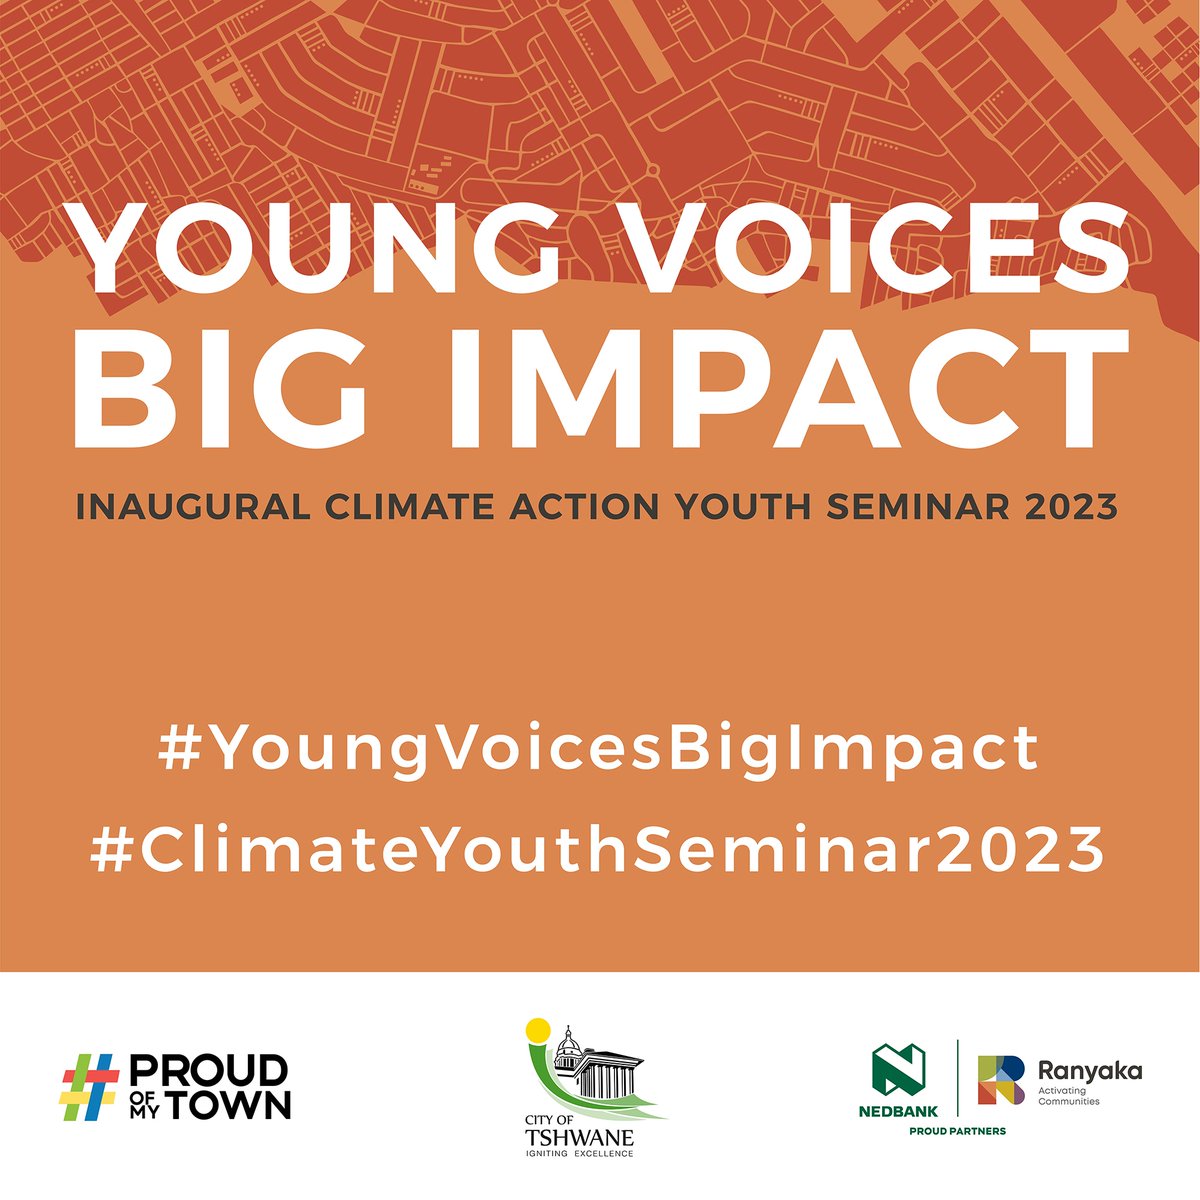 TODAY IS THE DAY! Excited for the Inaugural Tshwane Youth Climate Action Seminar today! @CityofTshwane @Nedbank @CSIR @BMW_SA #YoungVoicesBigImpact #ClimateYouthSeminar2023